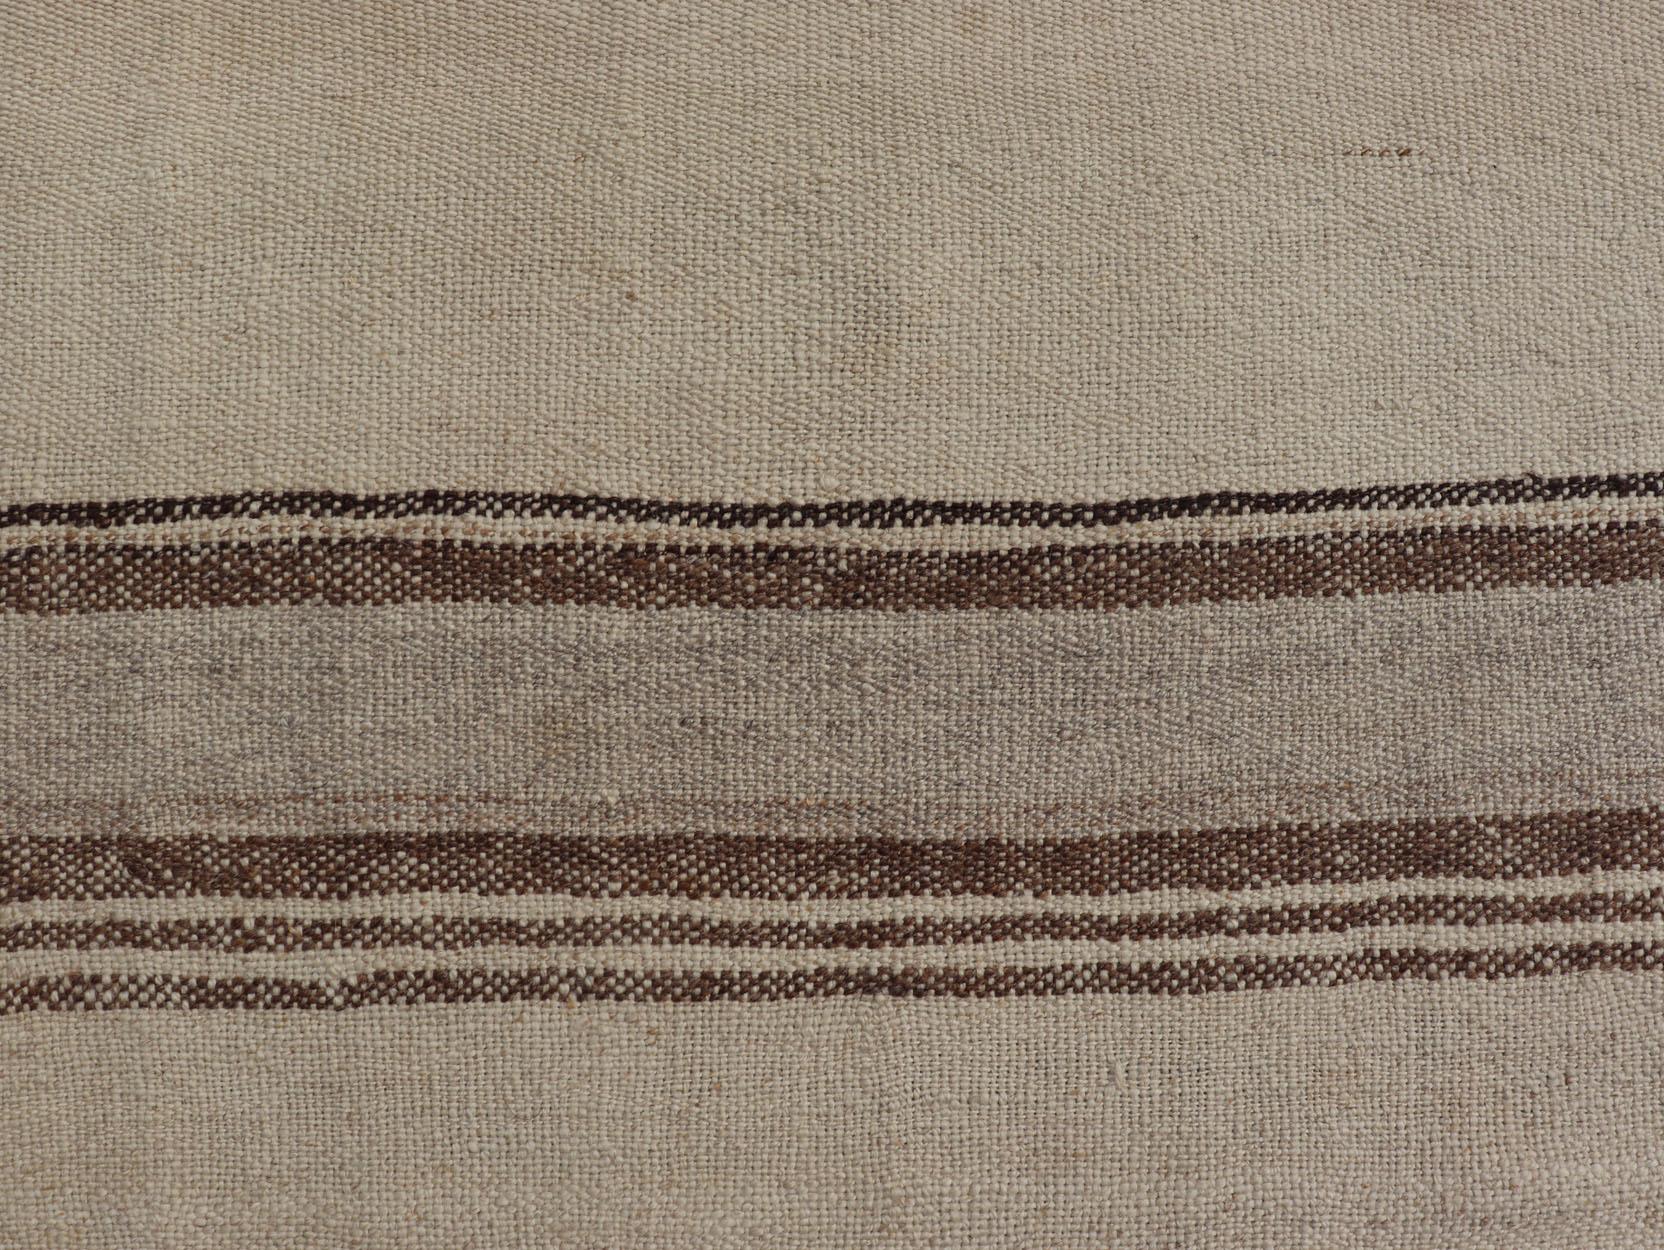 Wool Vintage Turkish Kilim with Vertical Stripes in Tan, Taupe, Grey, Cream and Brown For Sale